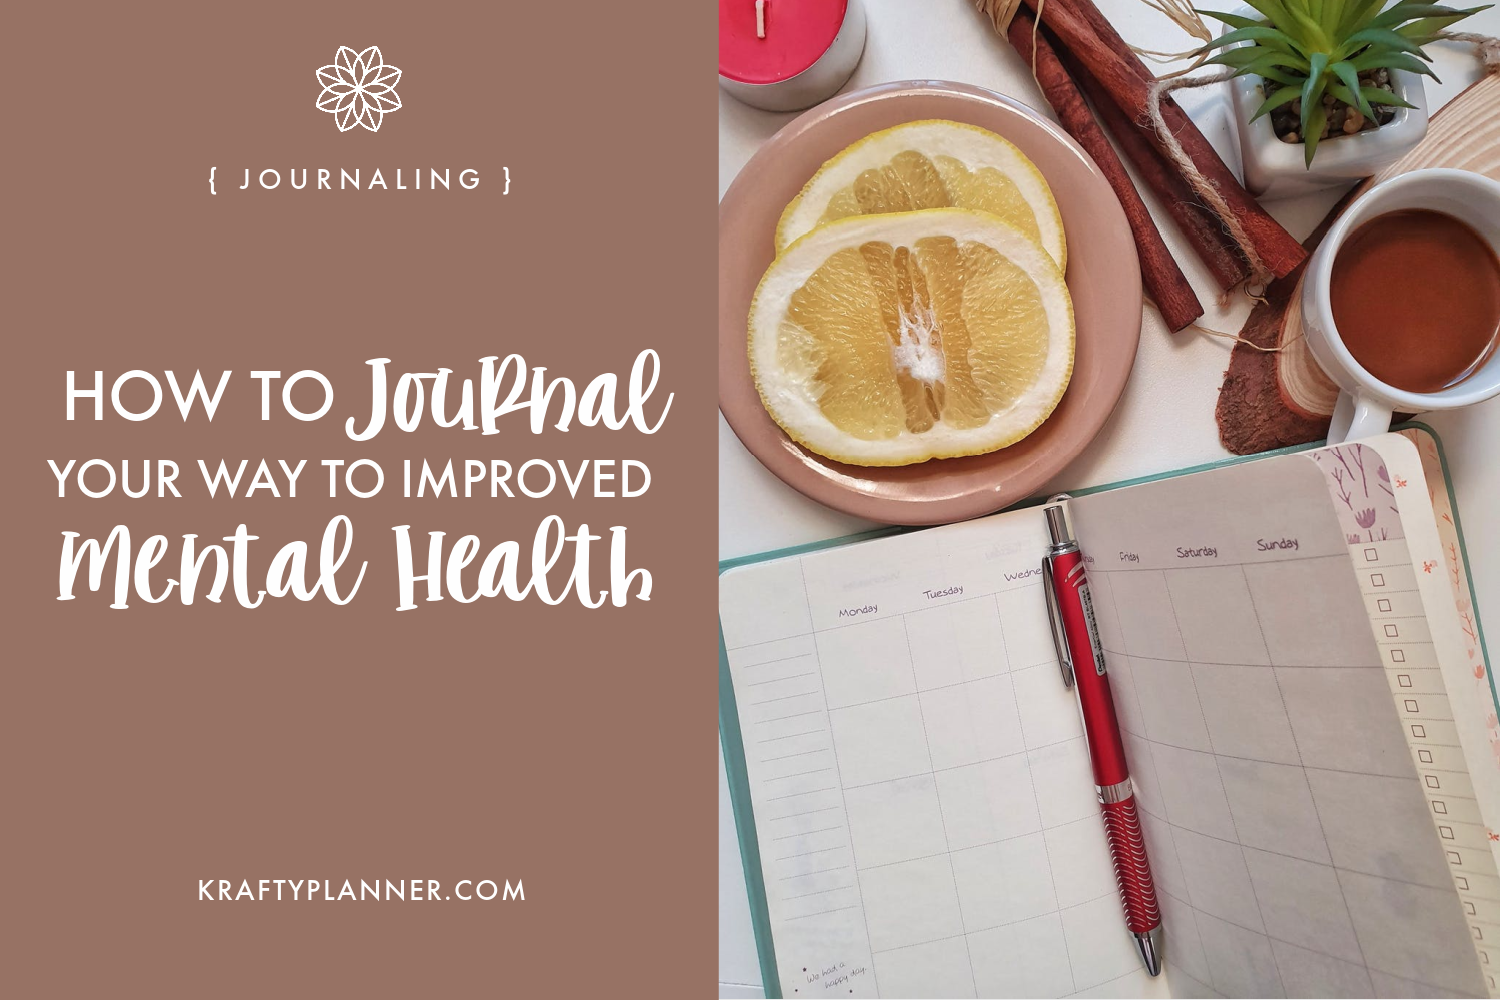 How to Journal Your Way to Improved Mental Health Main Image.png